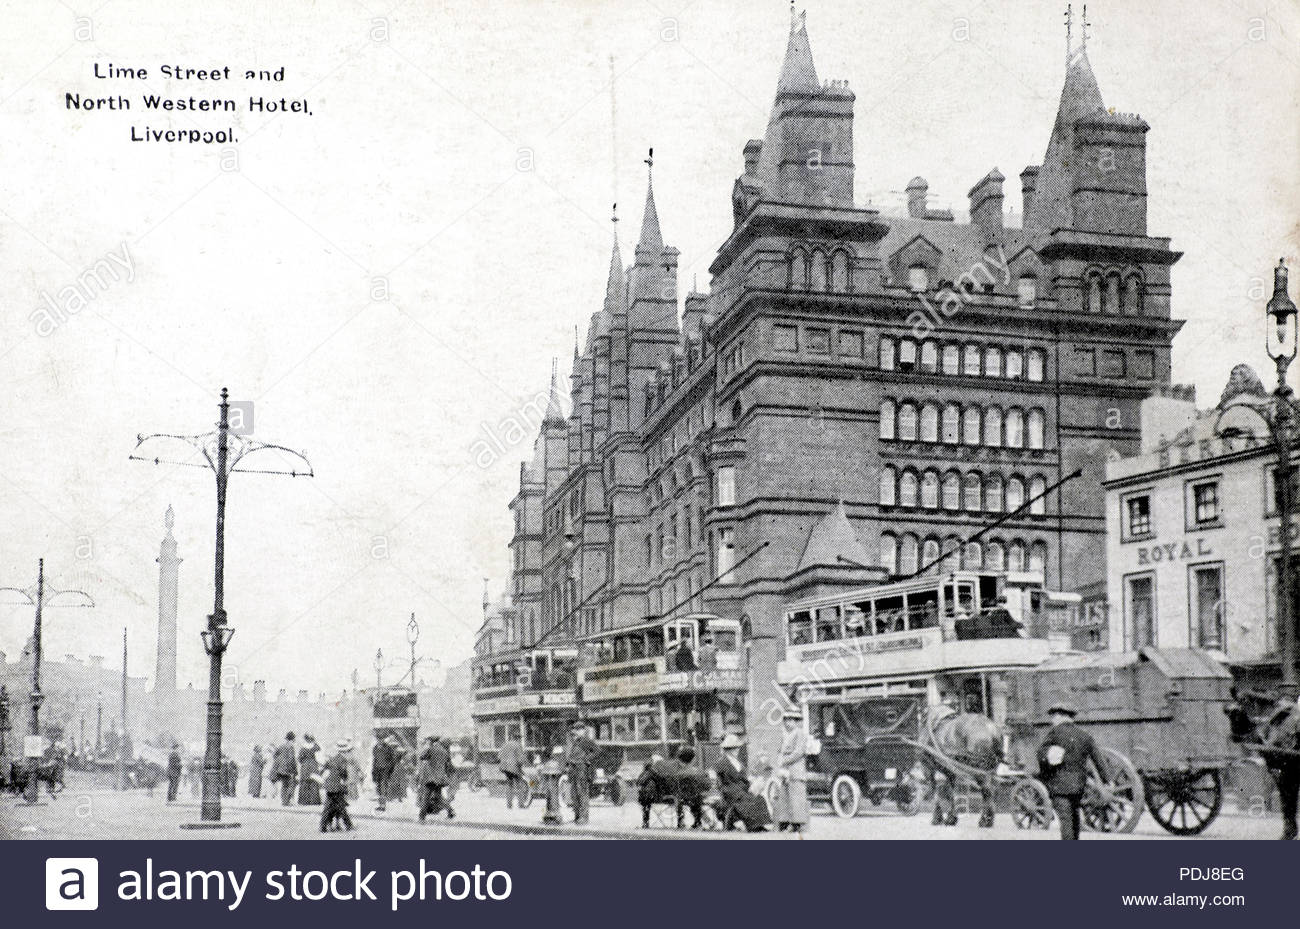 Lime Street and North Western Hotel, Liverpool, vintage postcard from 1906 Stock Photo